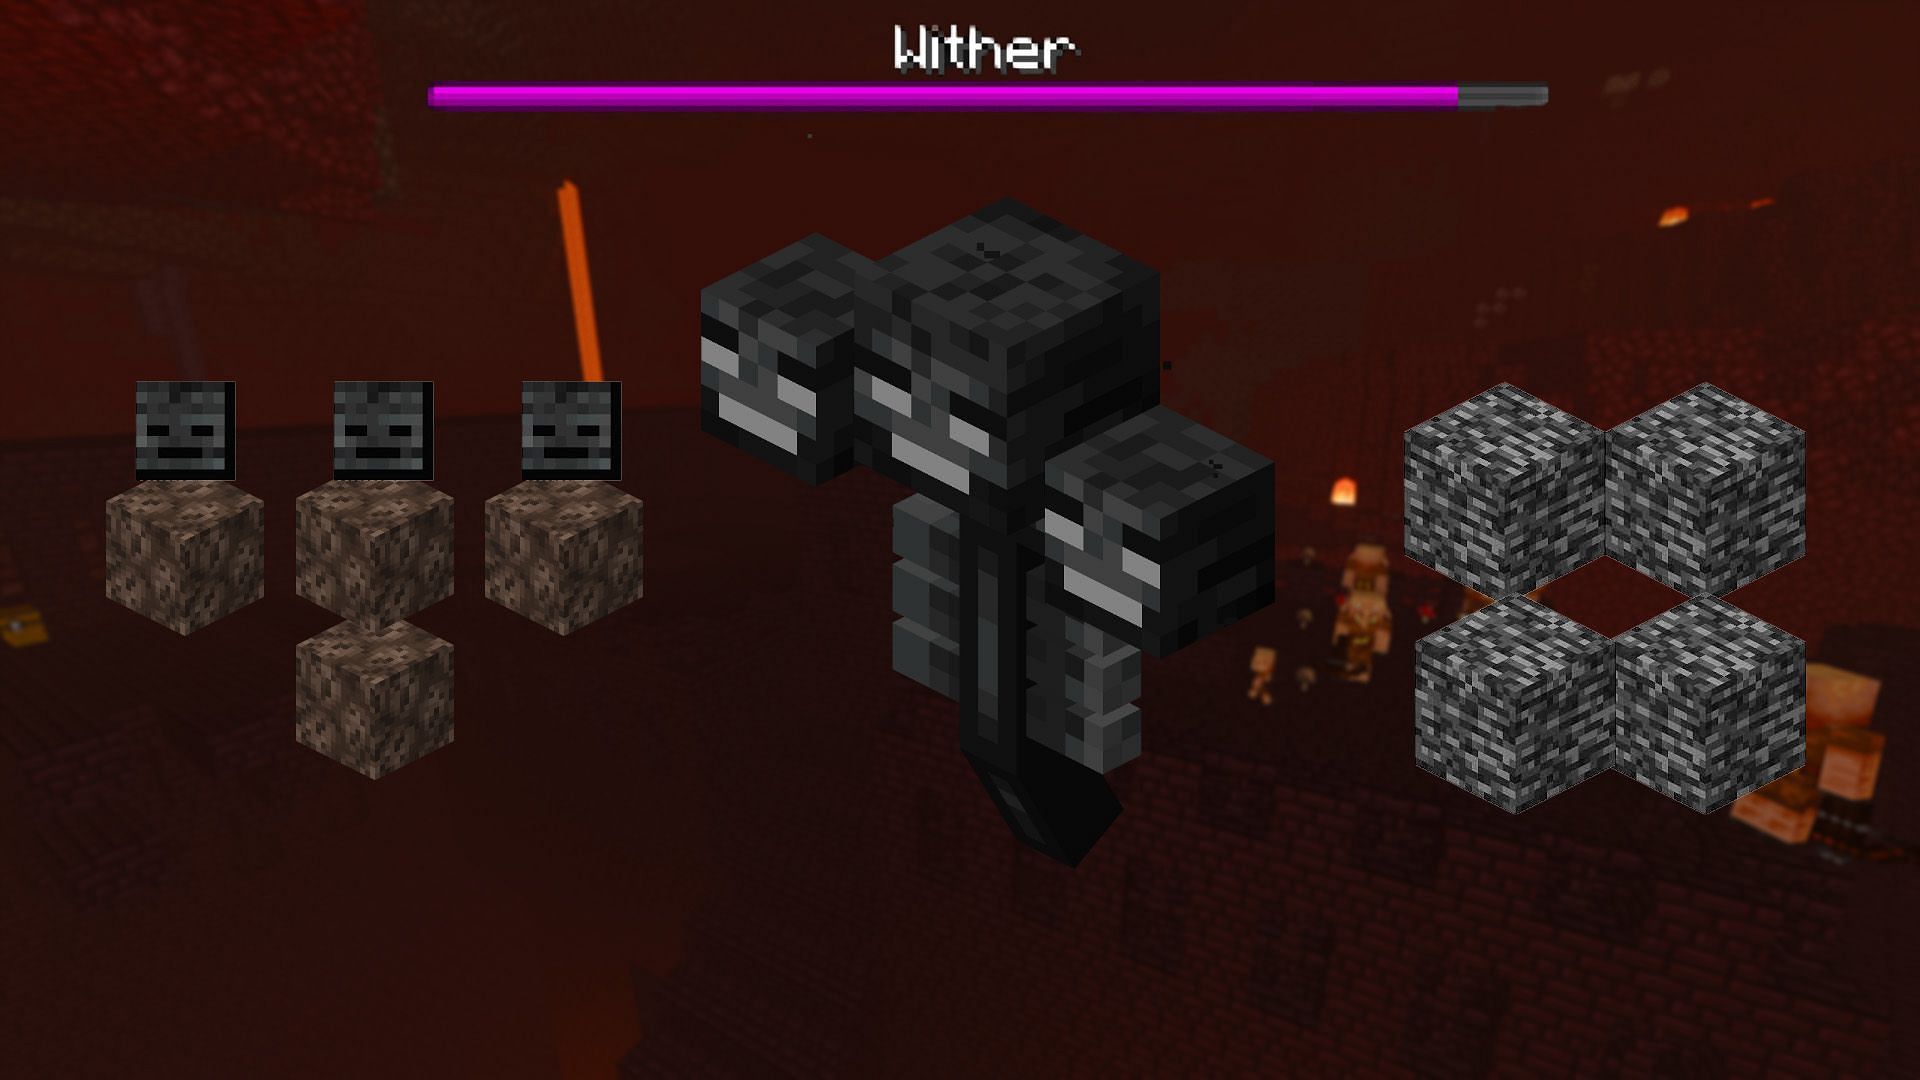 All Stages of Death Wither Storm 2023 